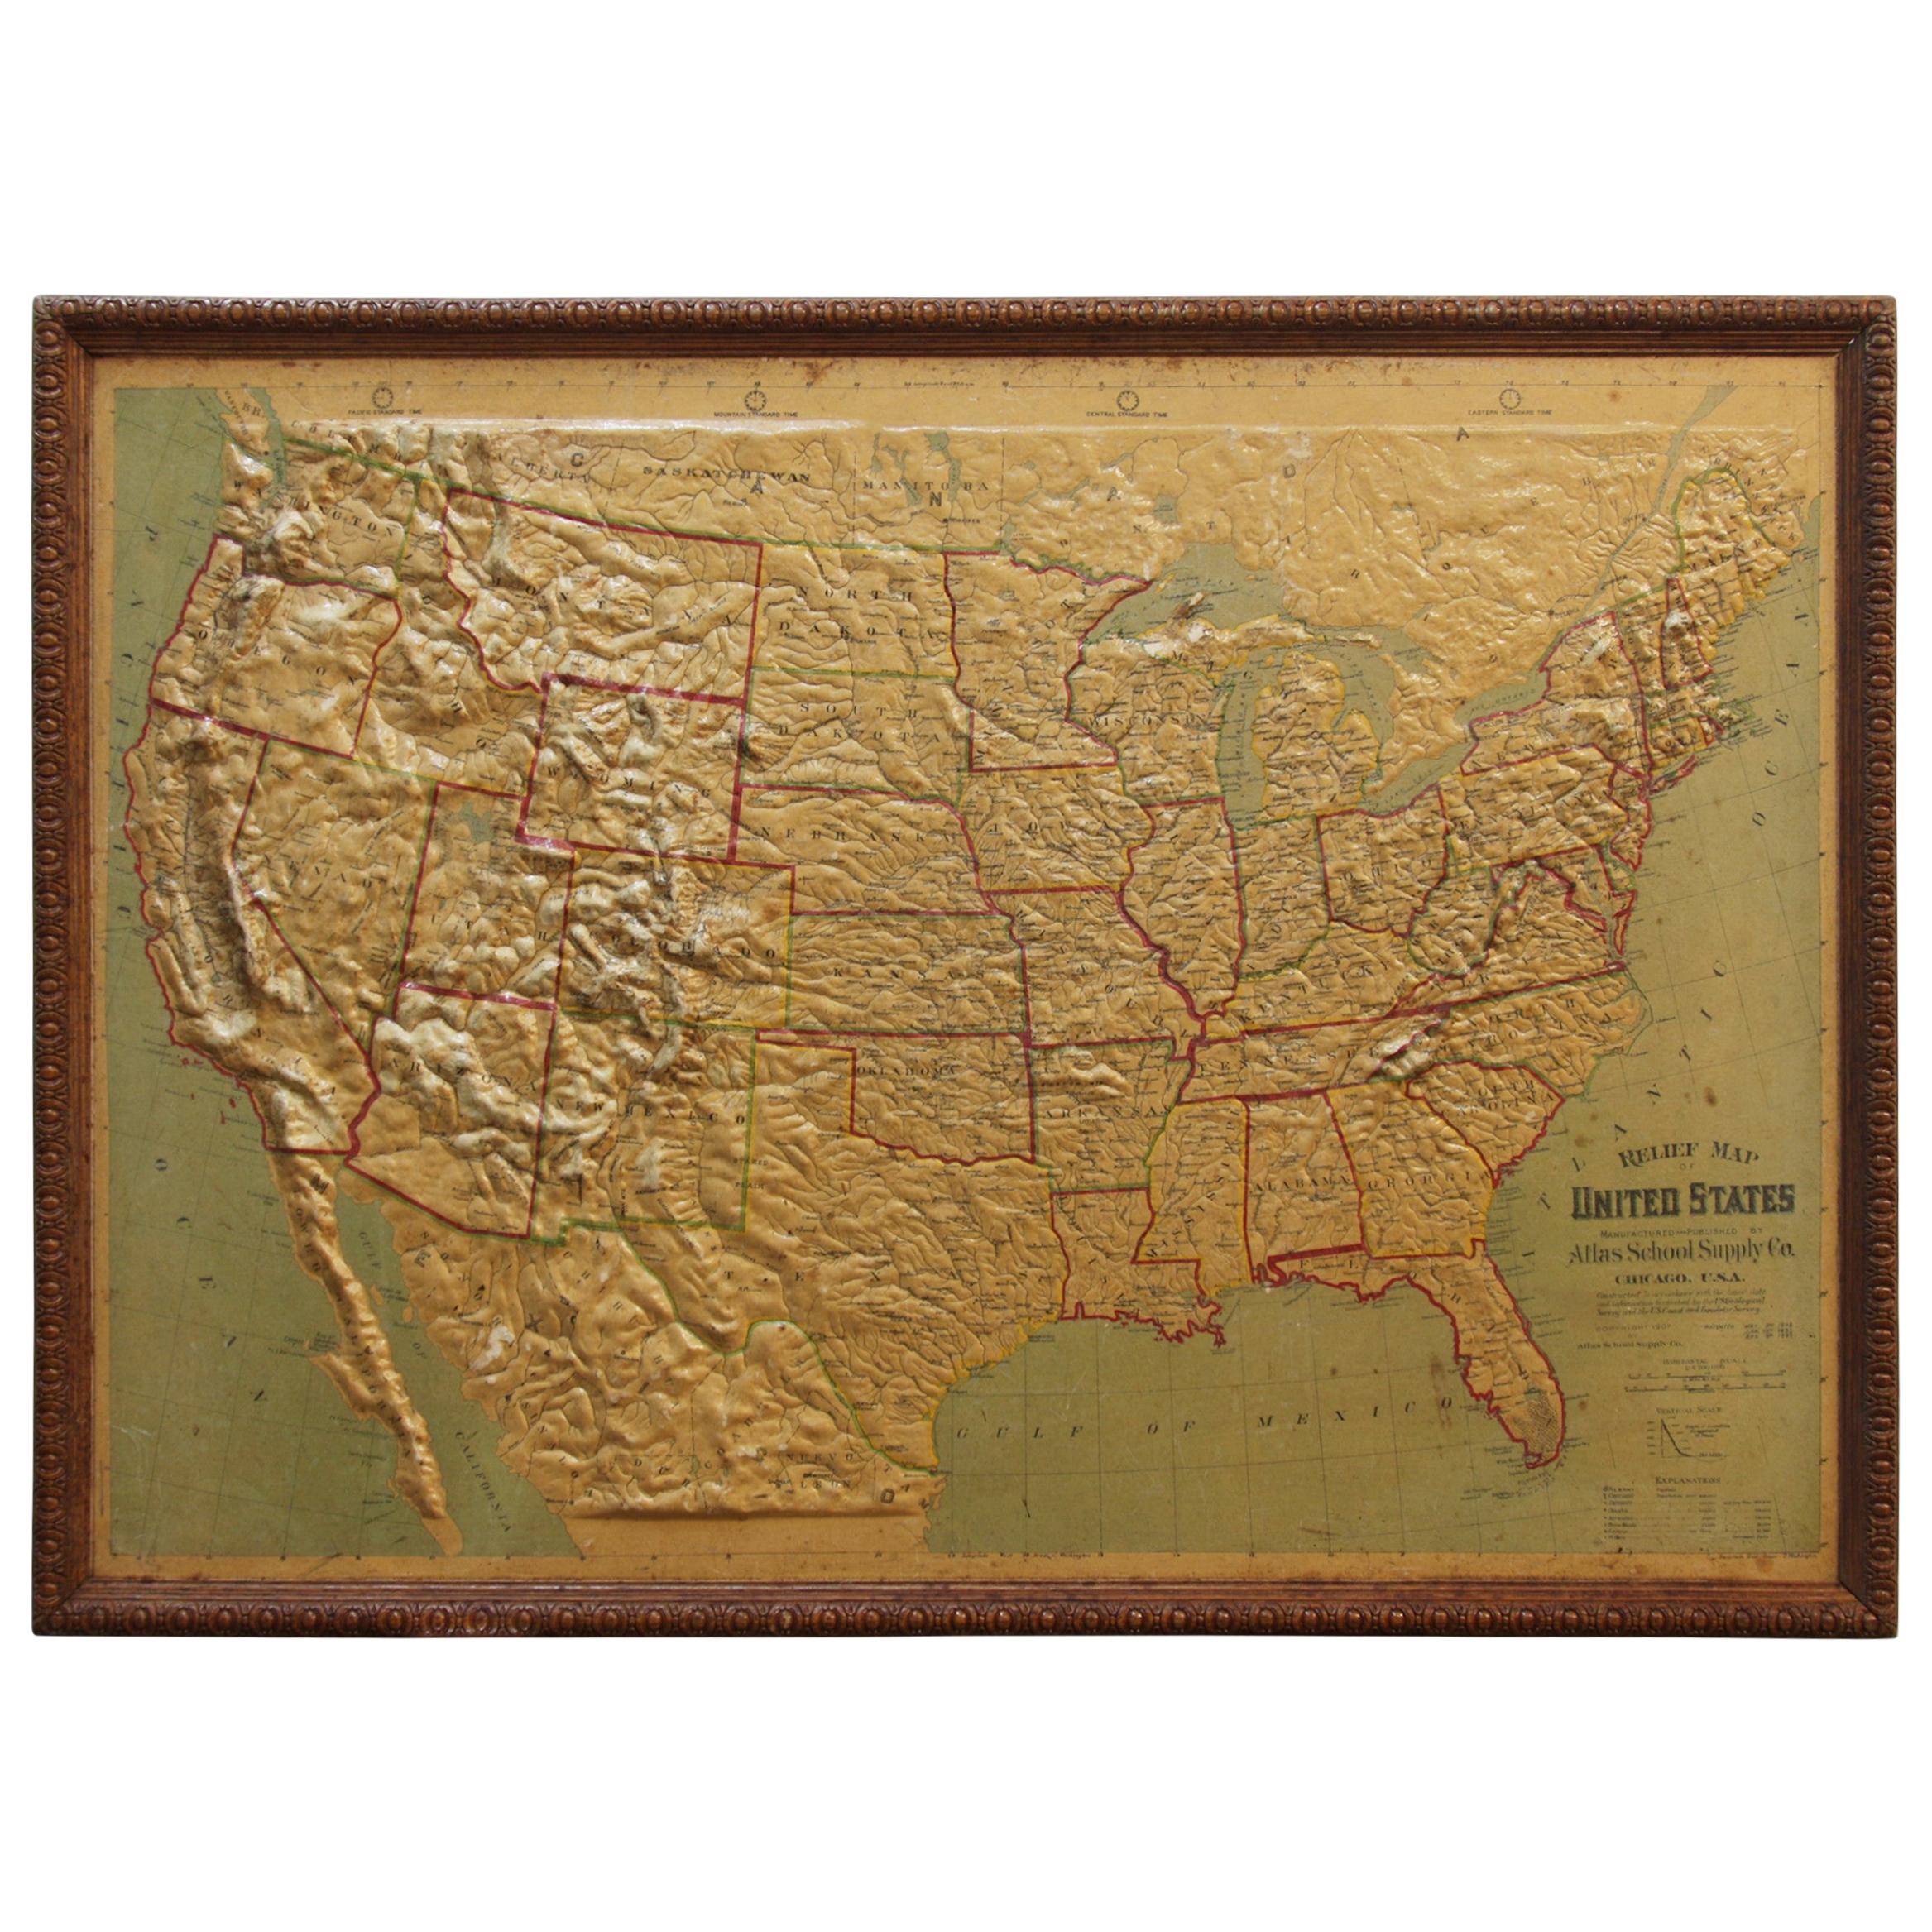 Large 1907 Vintage Relief Map of United States by Atlas School Supply of Chicago